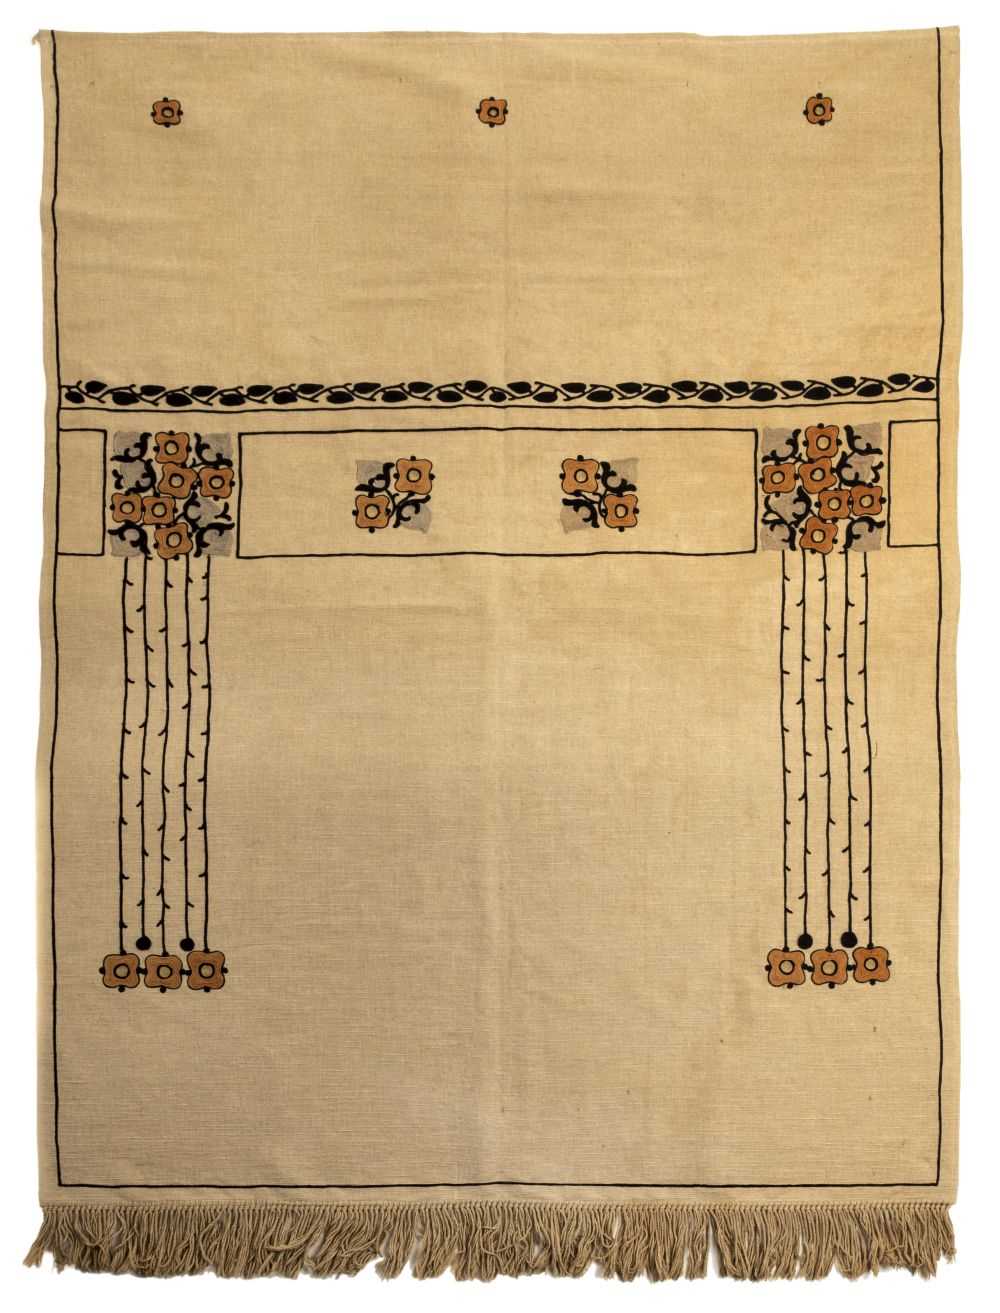 Lot 136 - Arts & Crafts. An embroidered wall-hanging, circa 1900